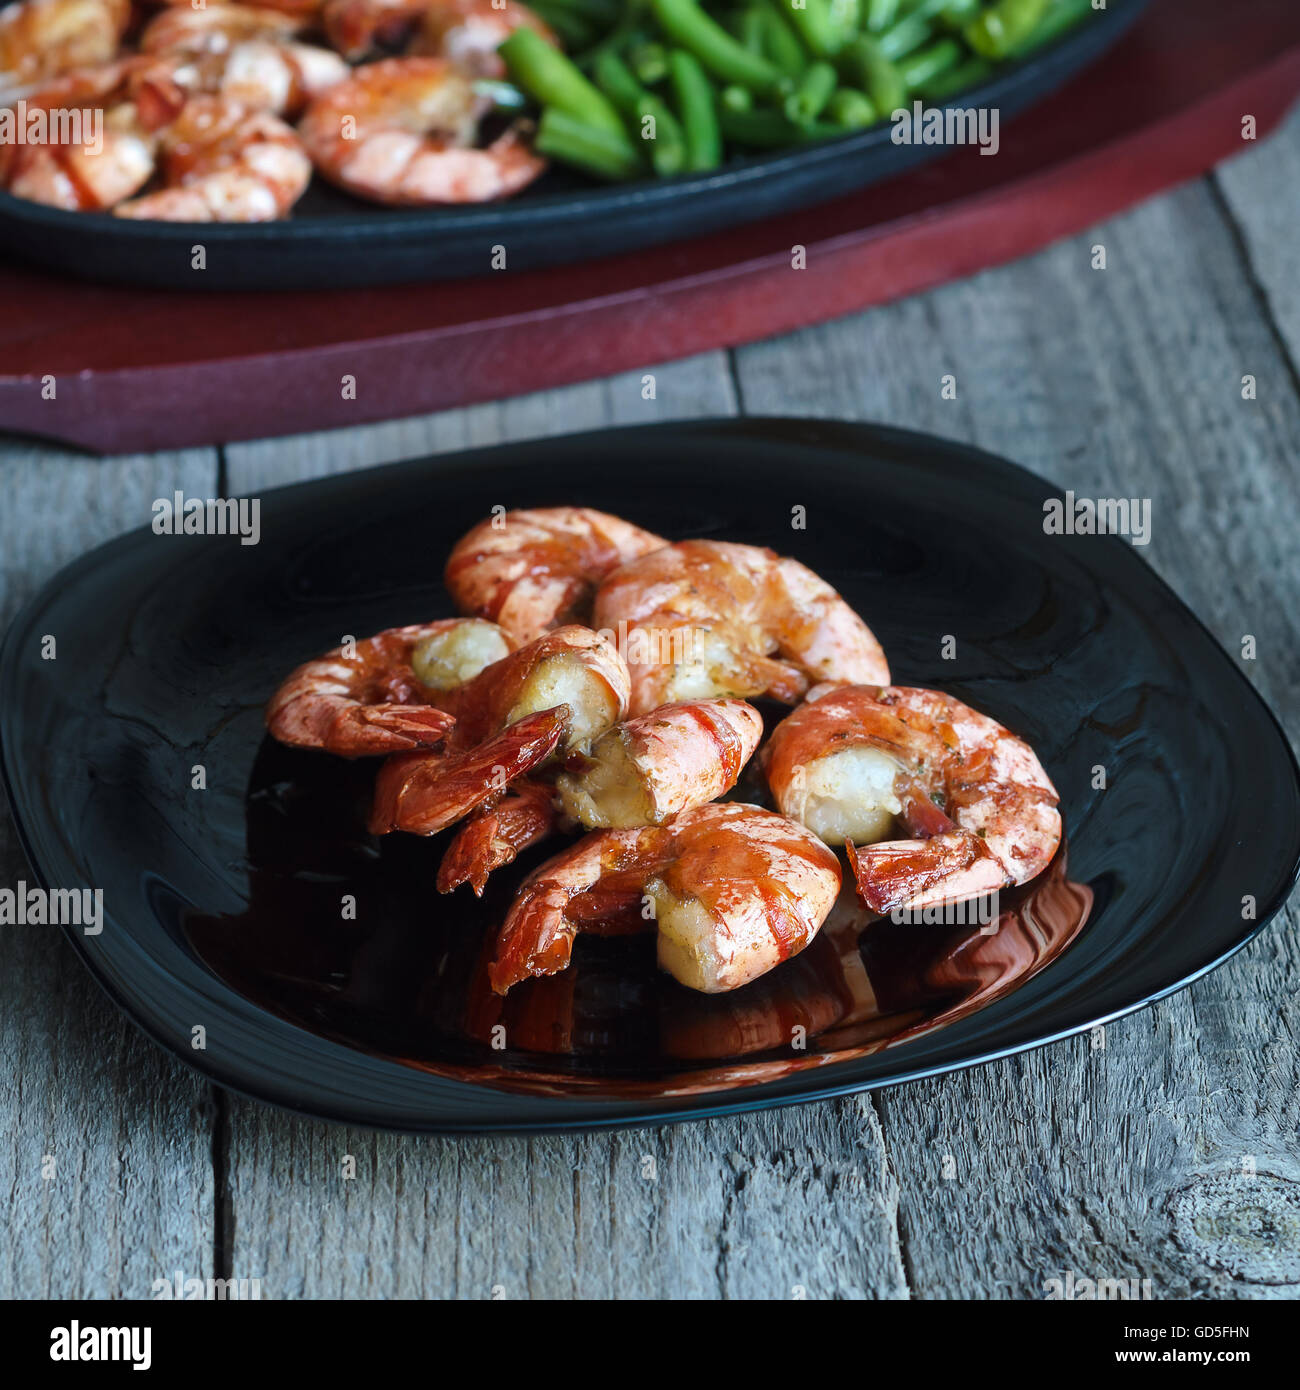 Dish with fried shrimp and green beans Stock Photo